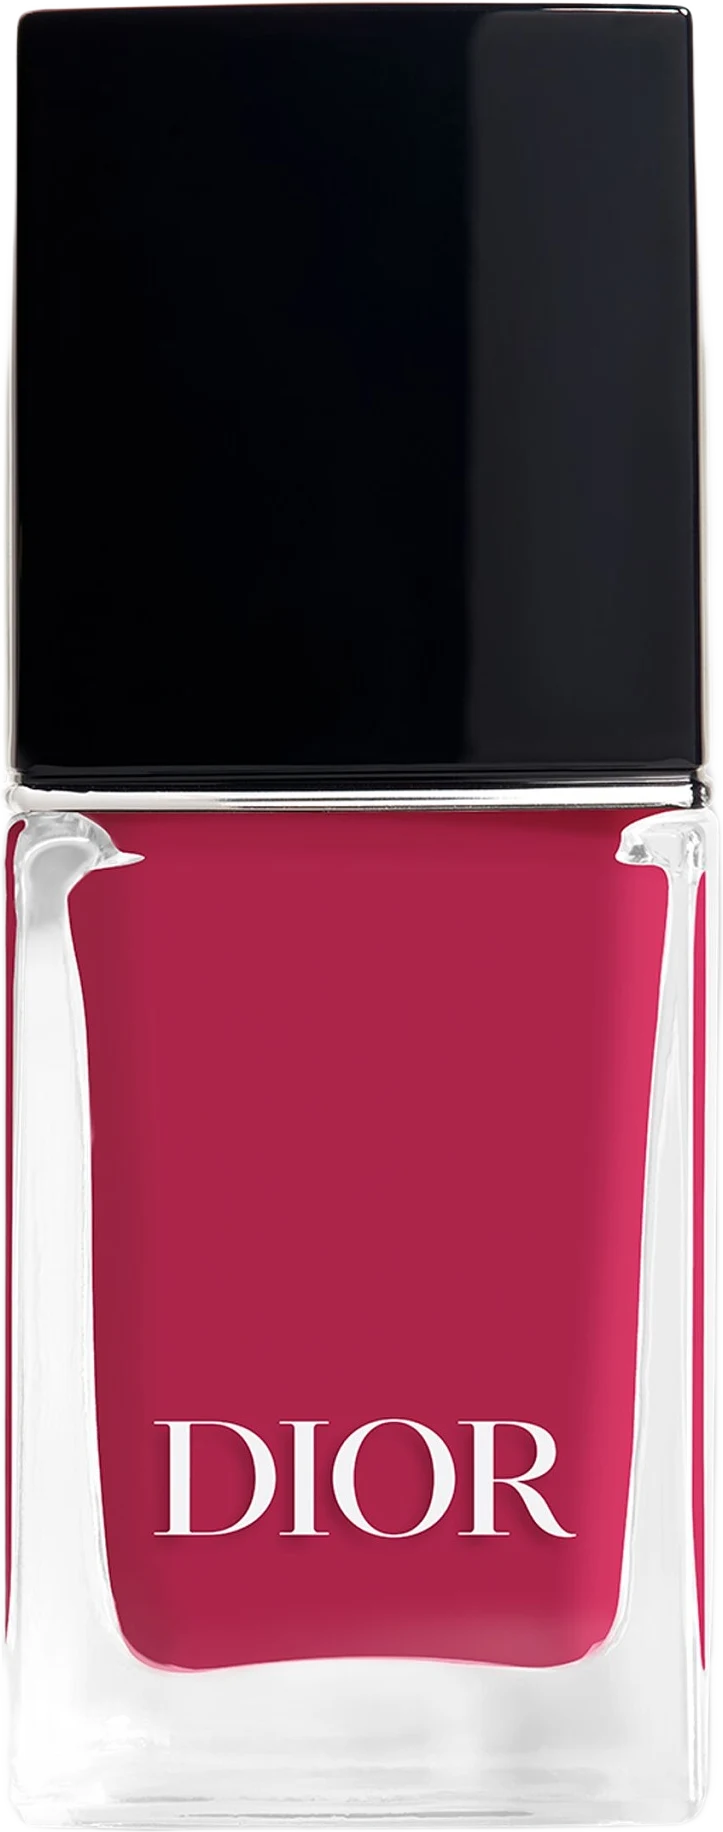 Dior Vernis Nail Polish with Gel Effect and Couture Color